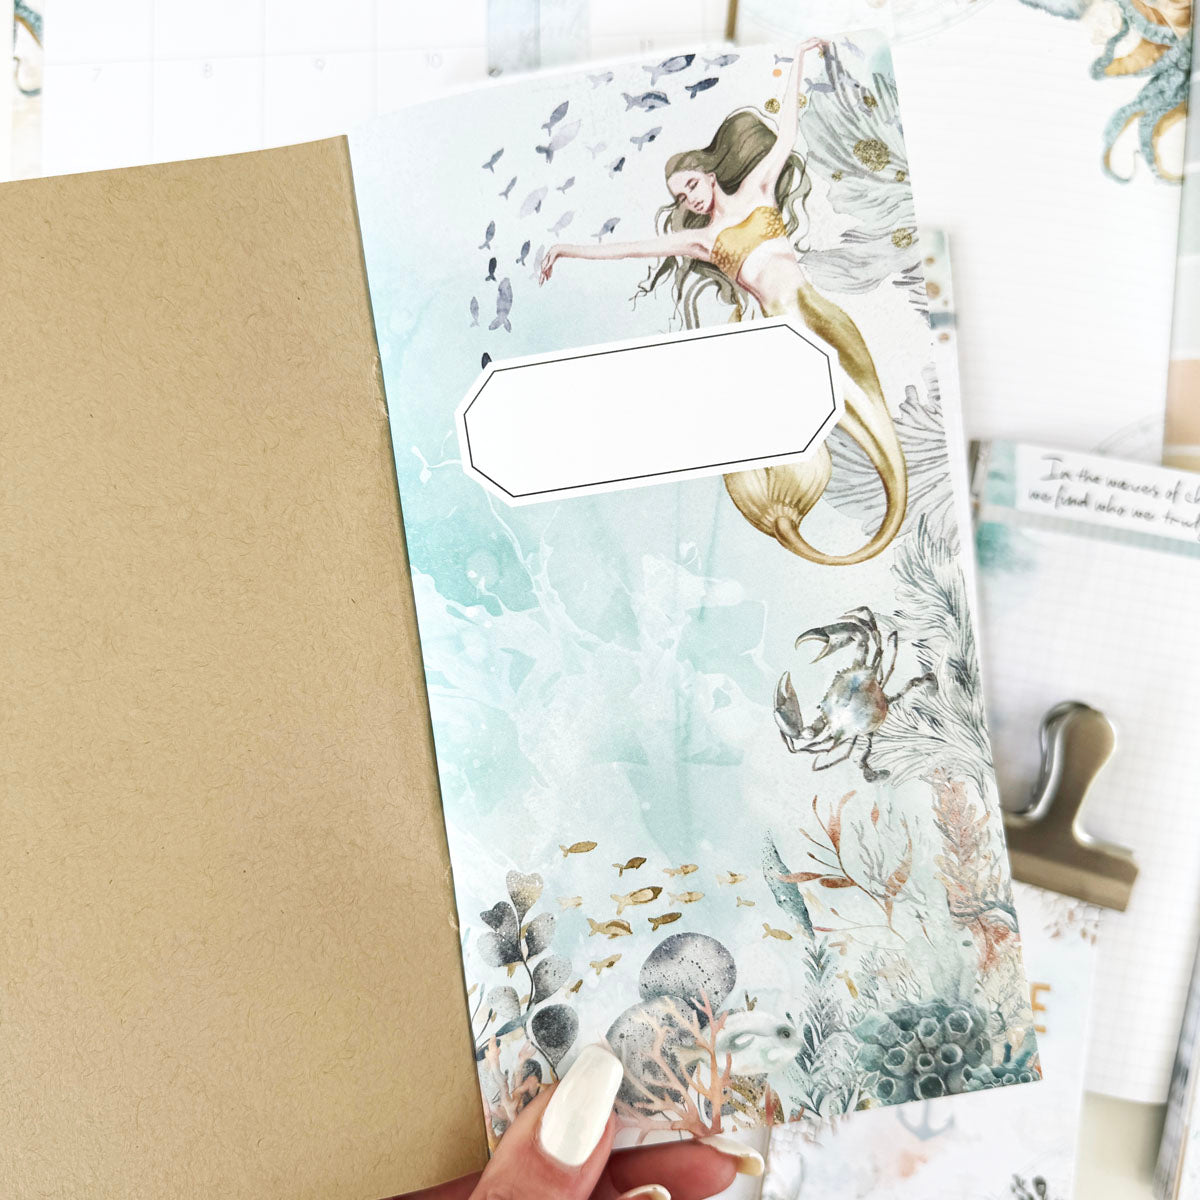 SimpleDaisy Notebook Subscription - 1 month